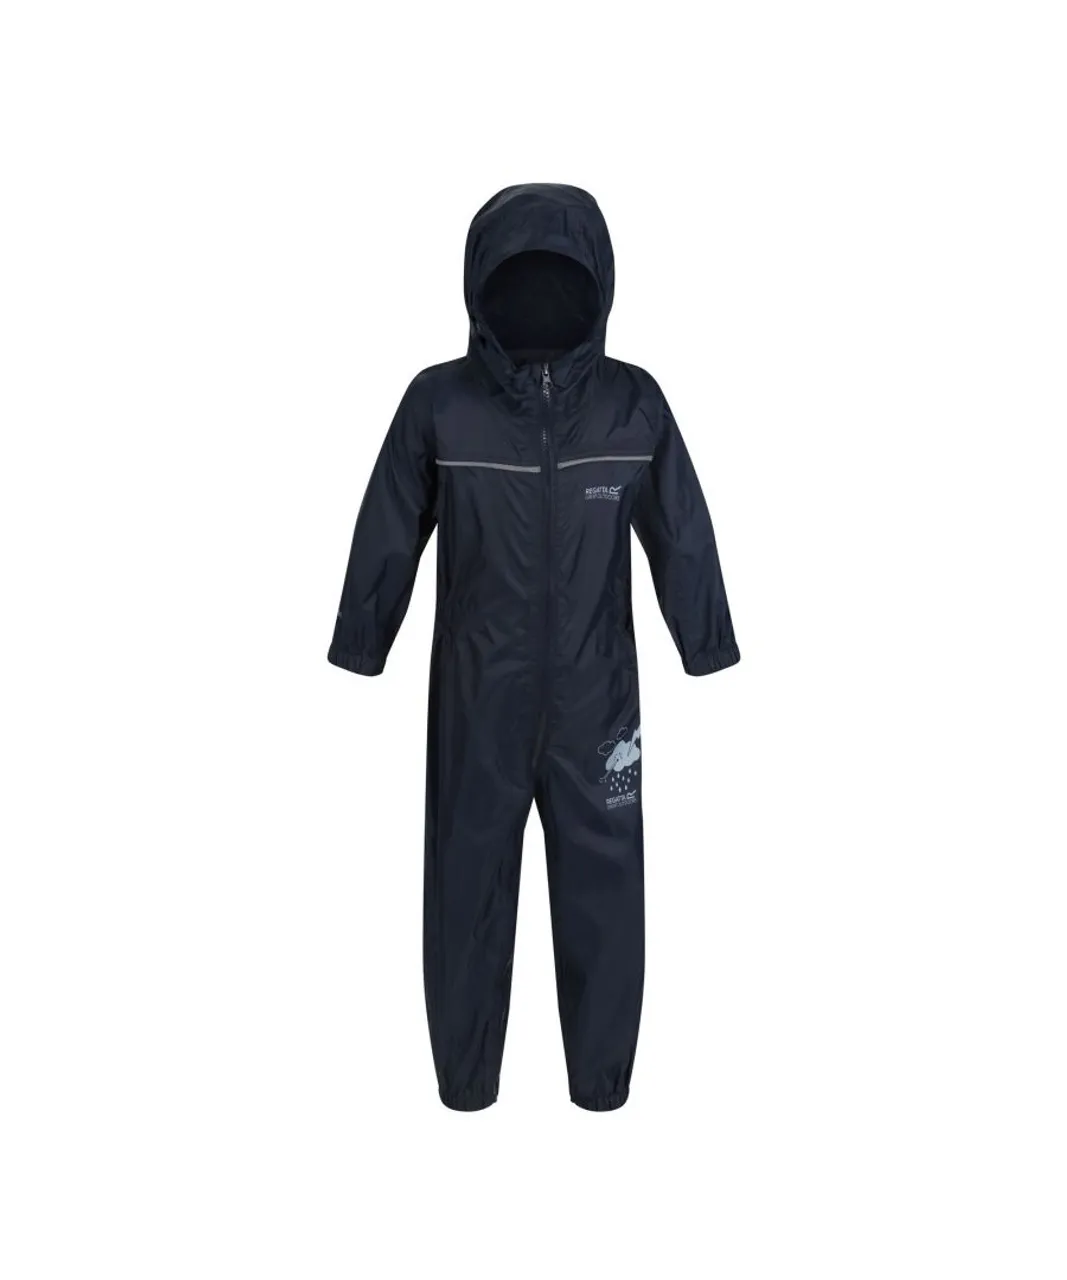 Regatta Boys Great Outdoors Childrens Toddlers Puddle IV Waterproof Rainsuit - Navy